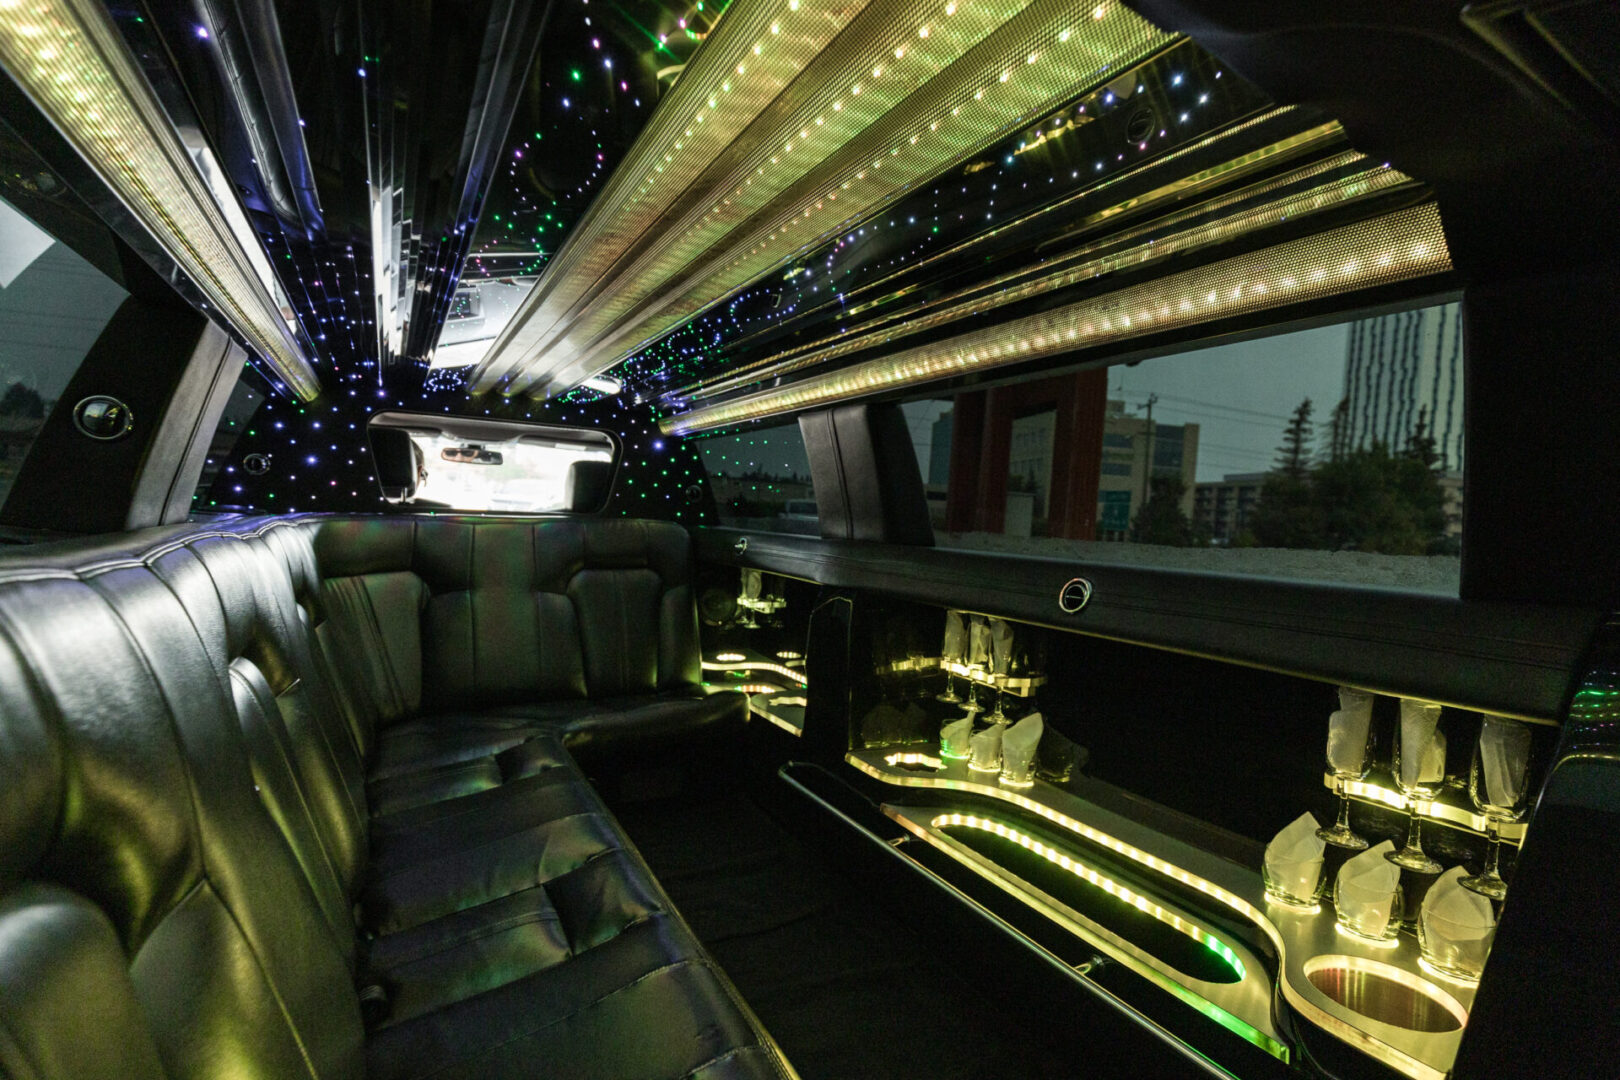 A limo is shown with lights on the ceiling.